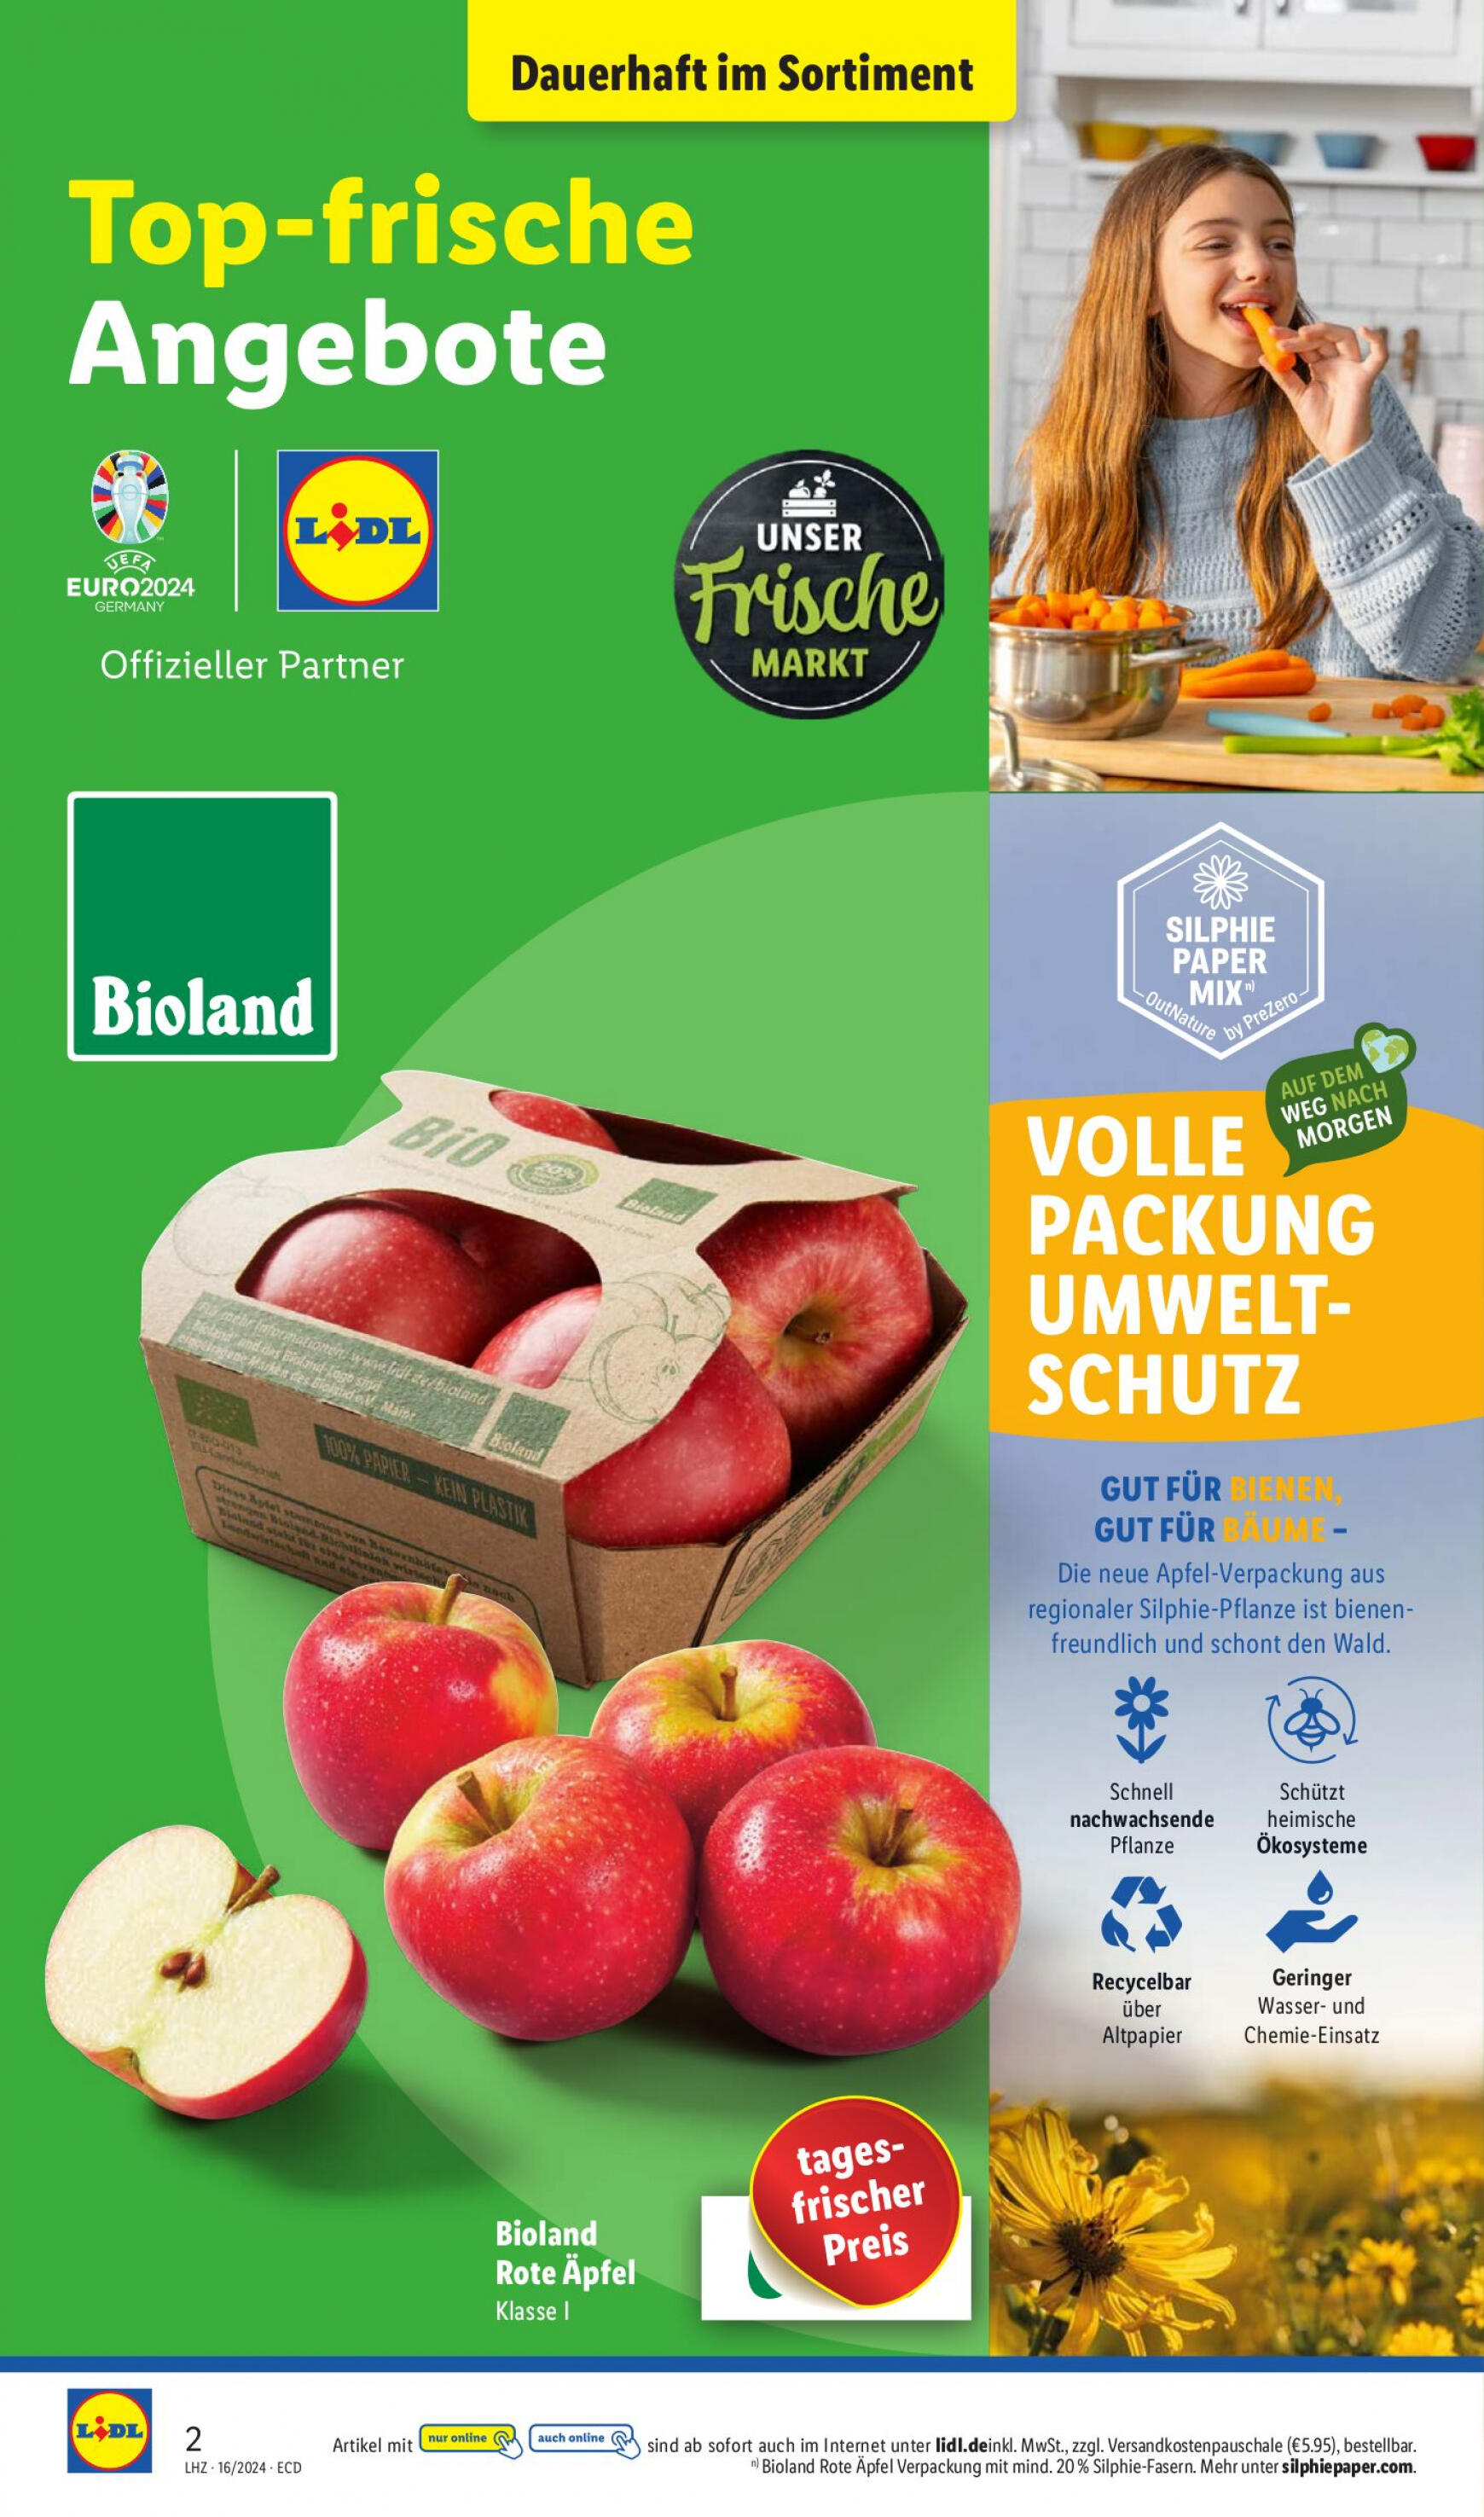 lidl - Flyer Lidl aktuell 15.04. - 20.04. - page: 2